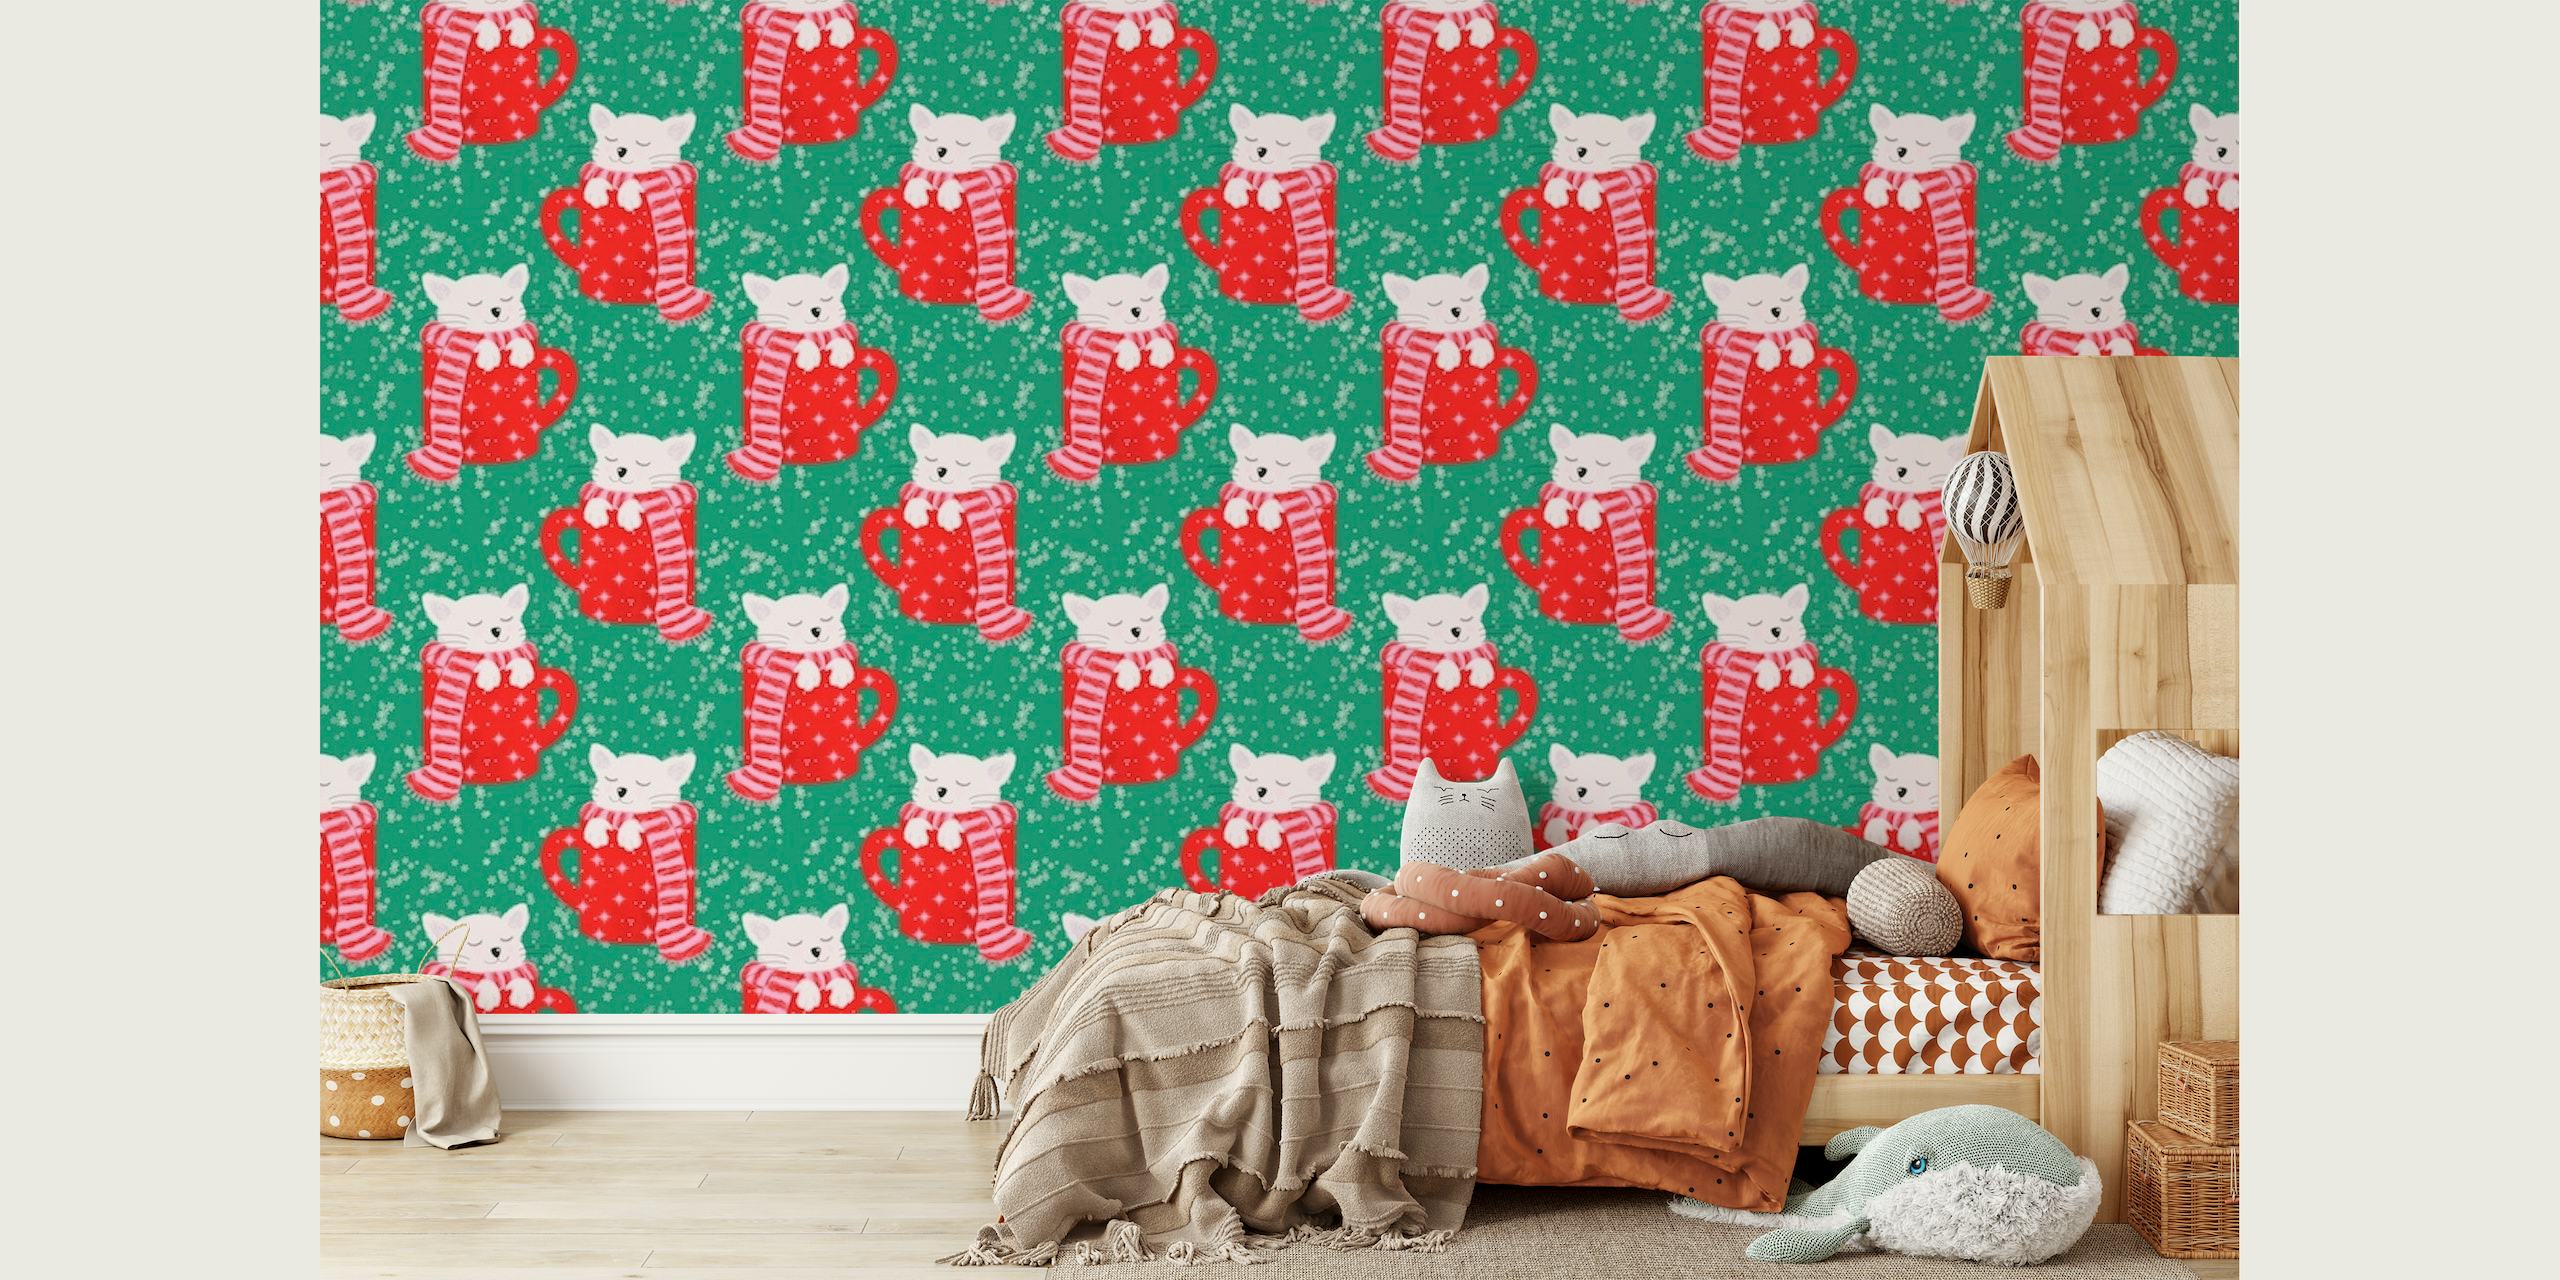 Cat in a cup on green wallpaper